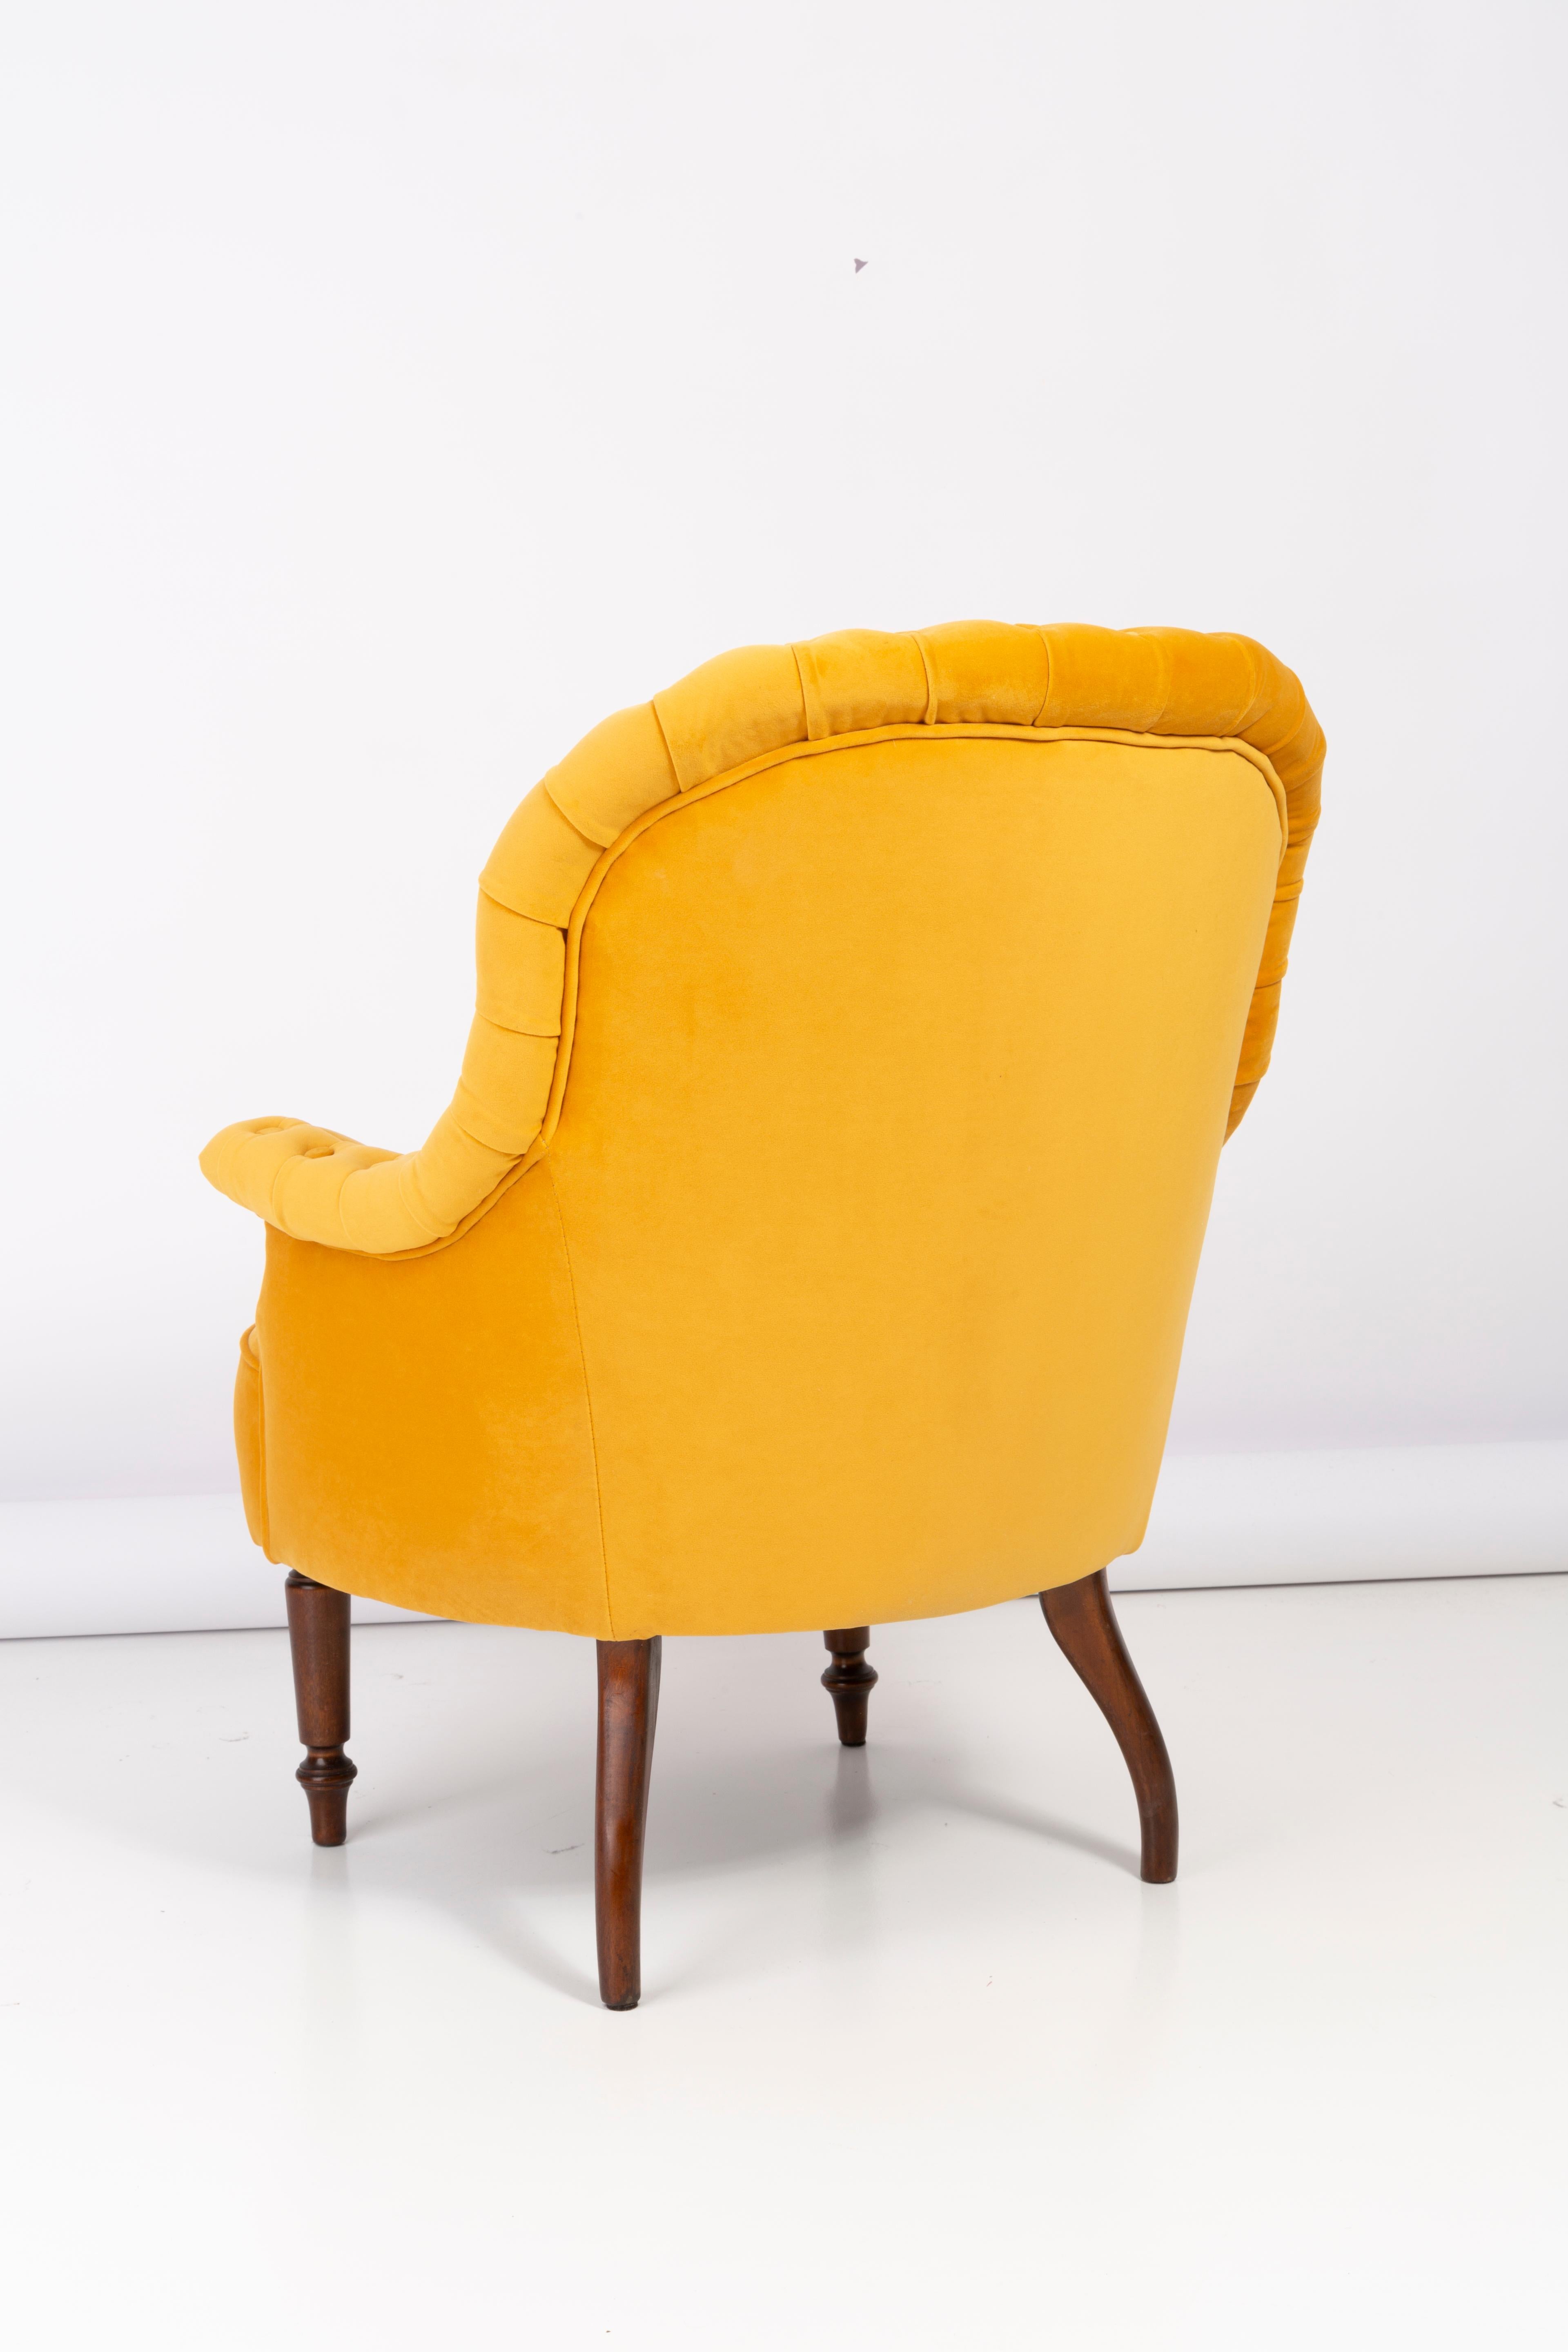 Pair of Unique Yellow Mustard Armchairs, 1930s, Germany For Sale 7